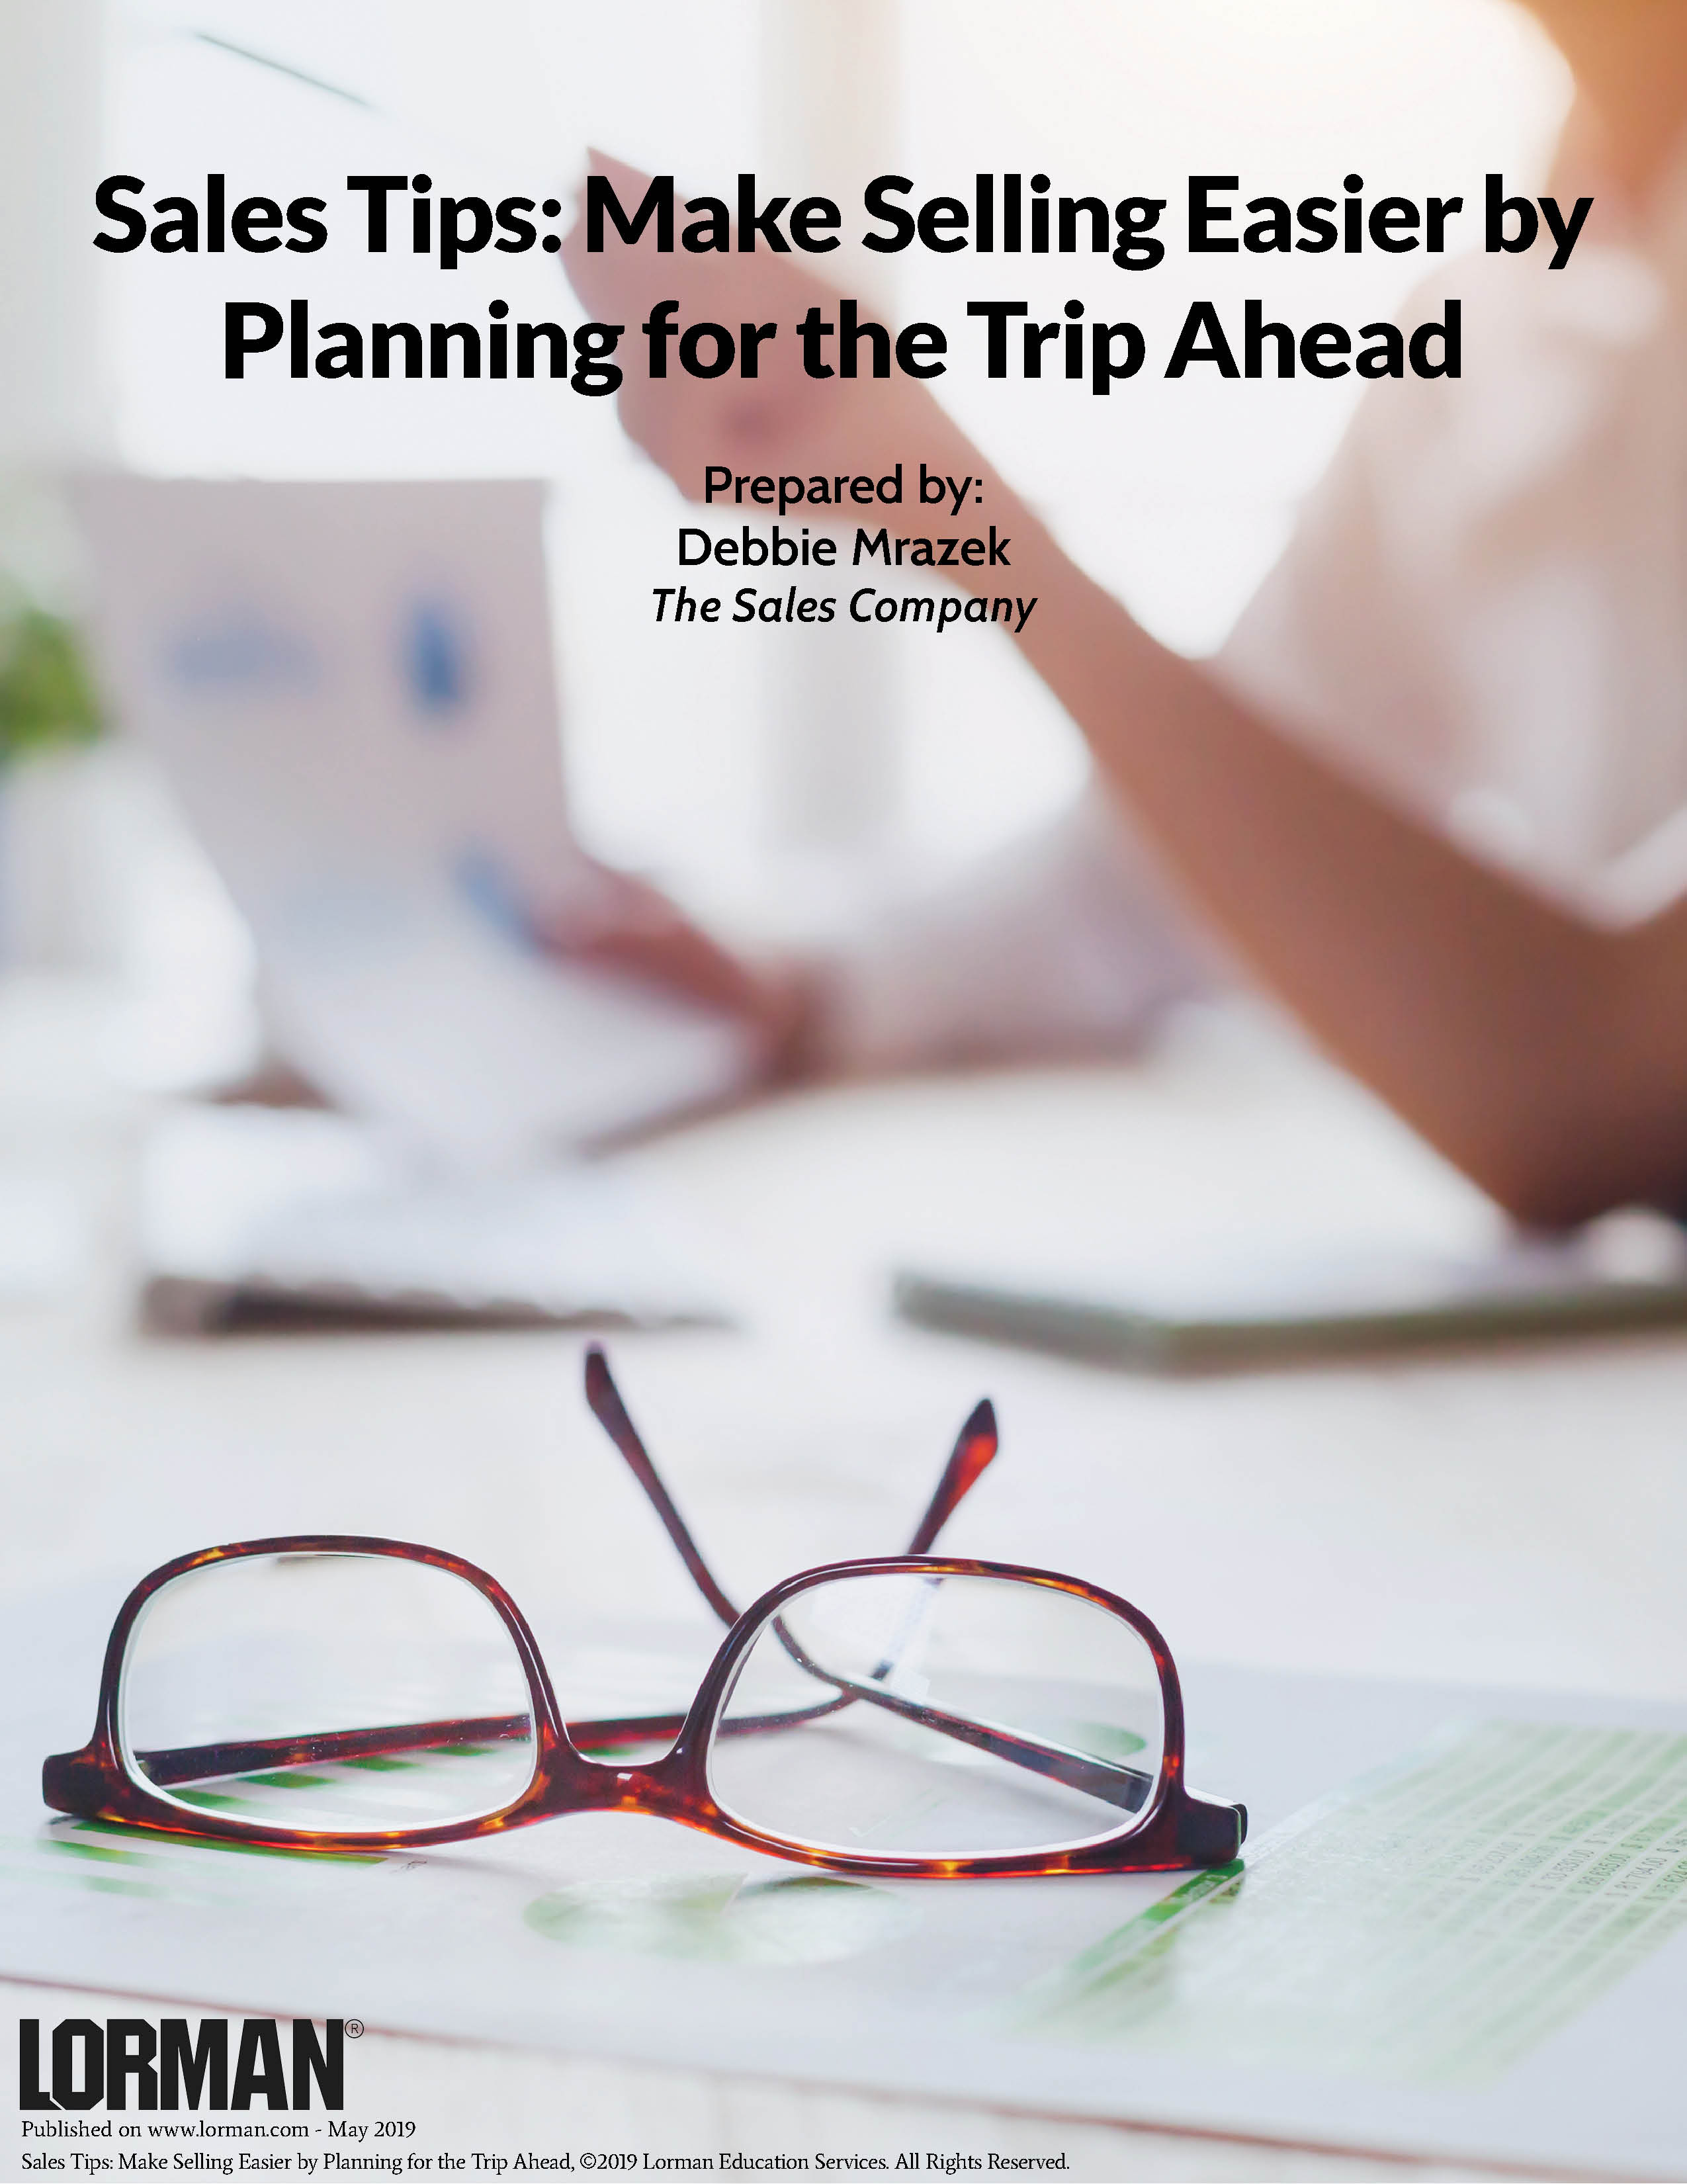 Sales Tips: Make Selling Easier by Planning for the Trip Ahead